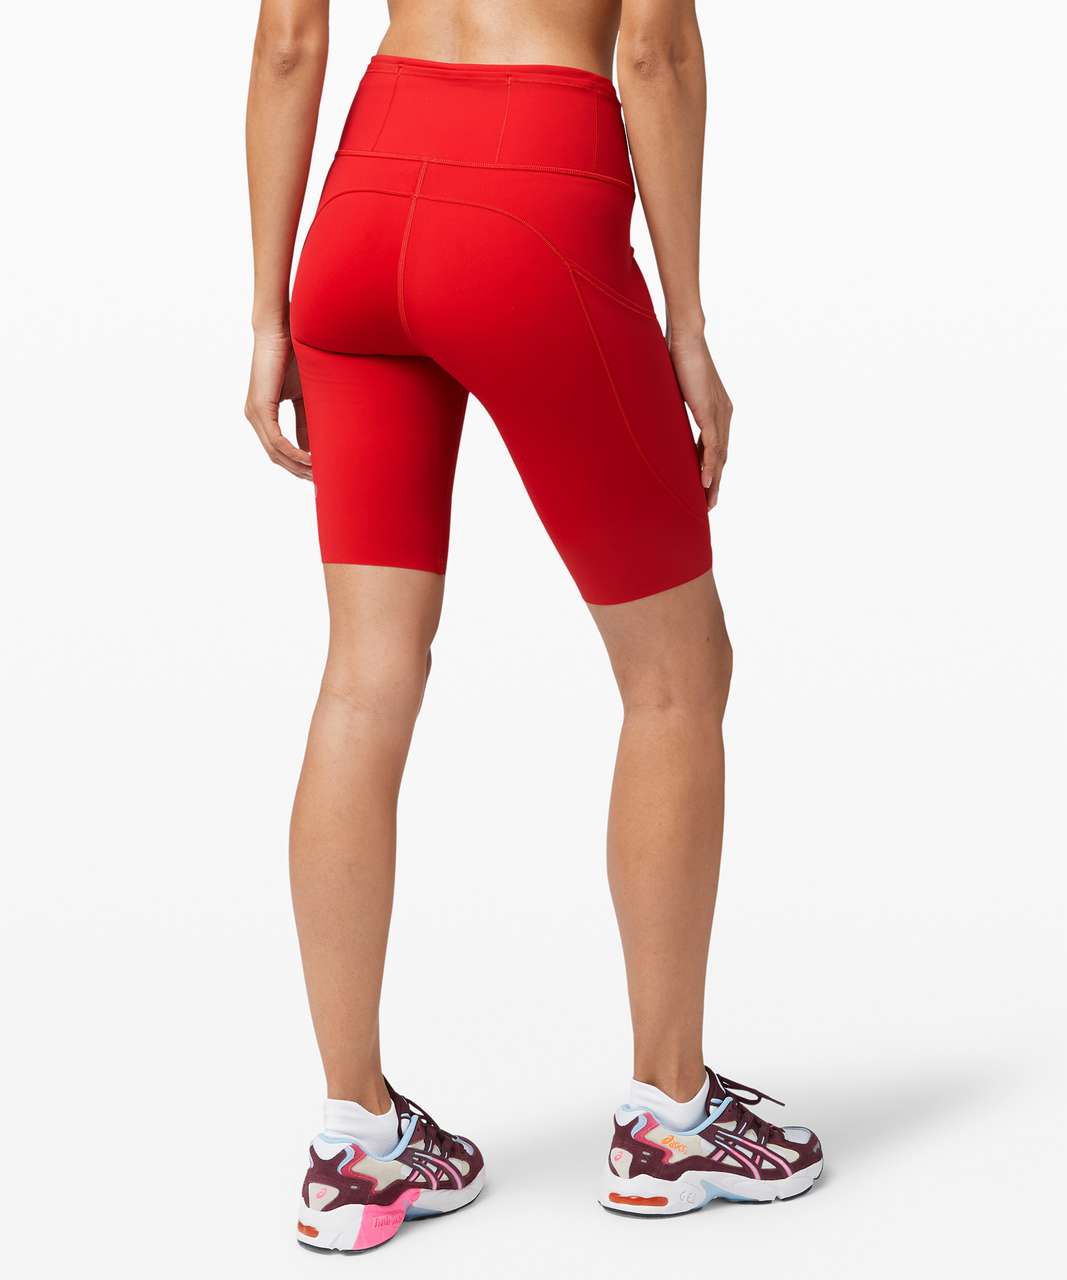 Lululemon Fast And Free Short 10" *Non-Reflective - Dark Red